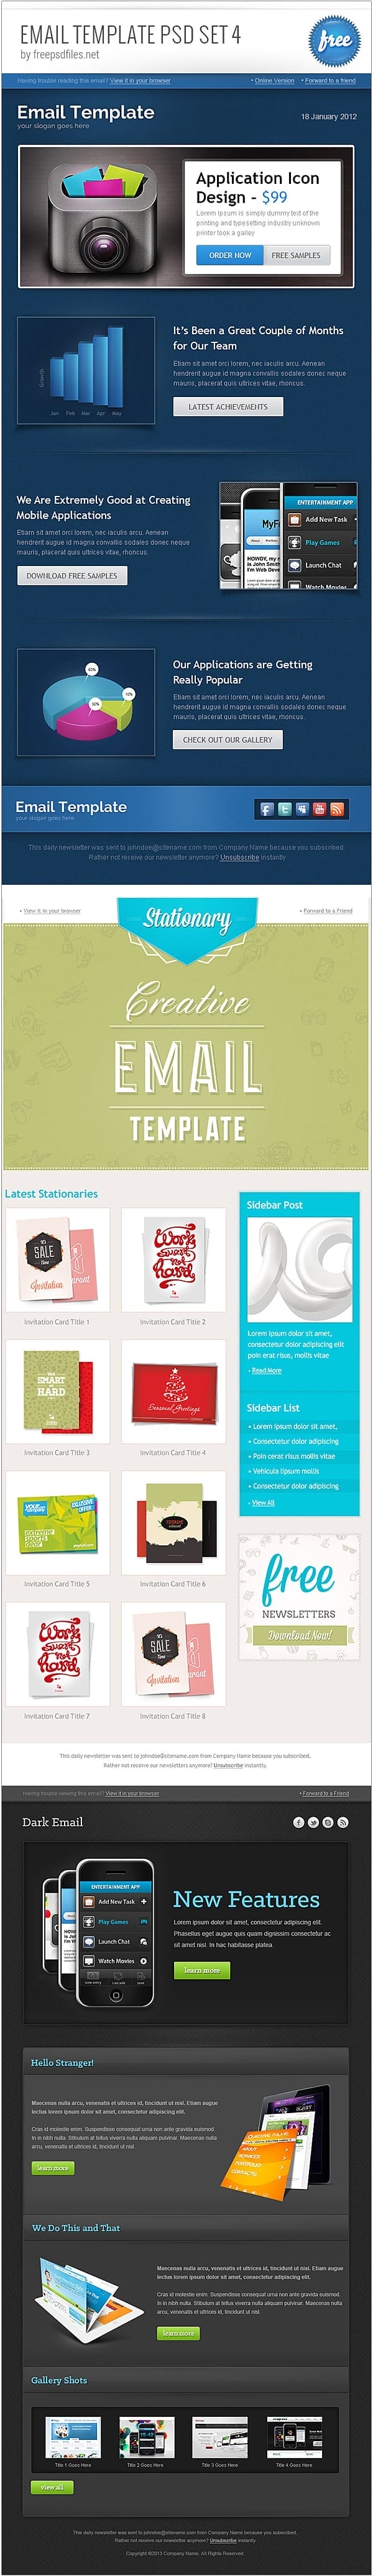  Email-Template-PSD-Set